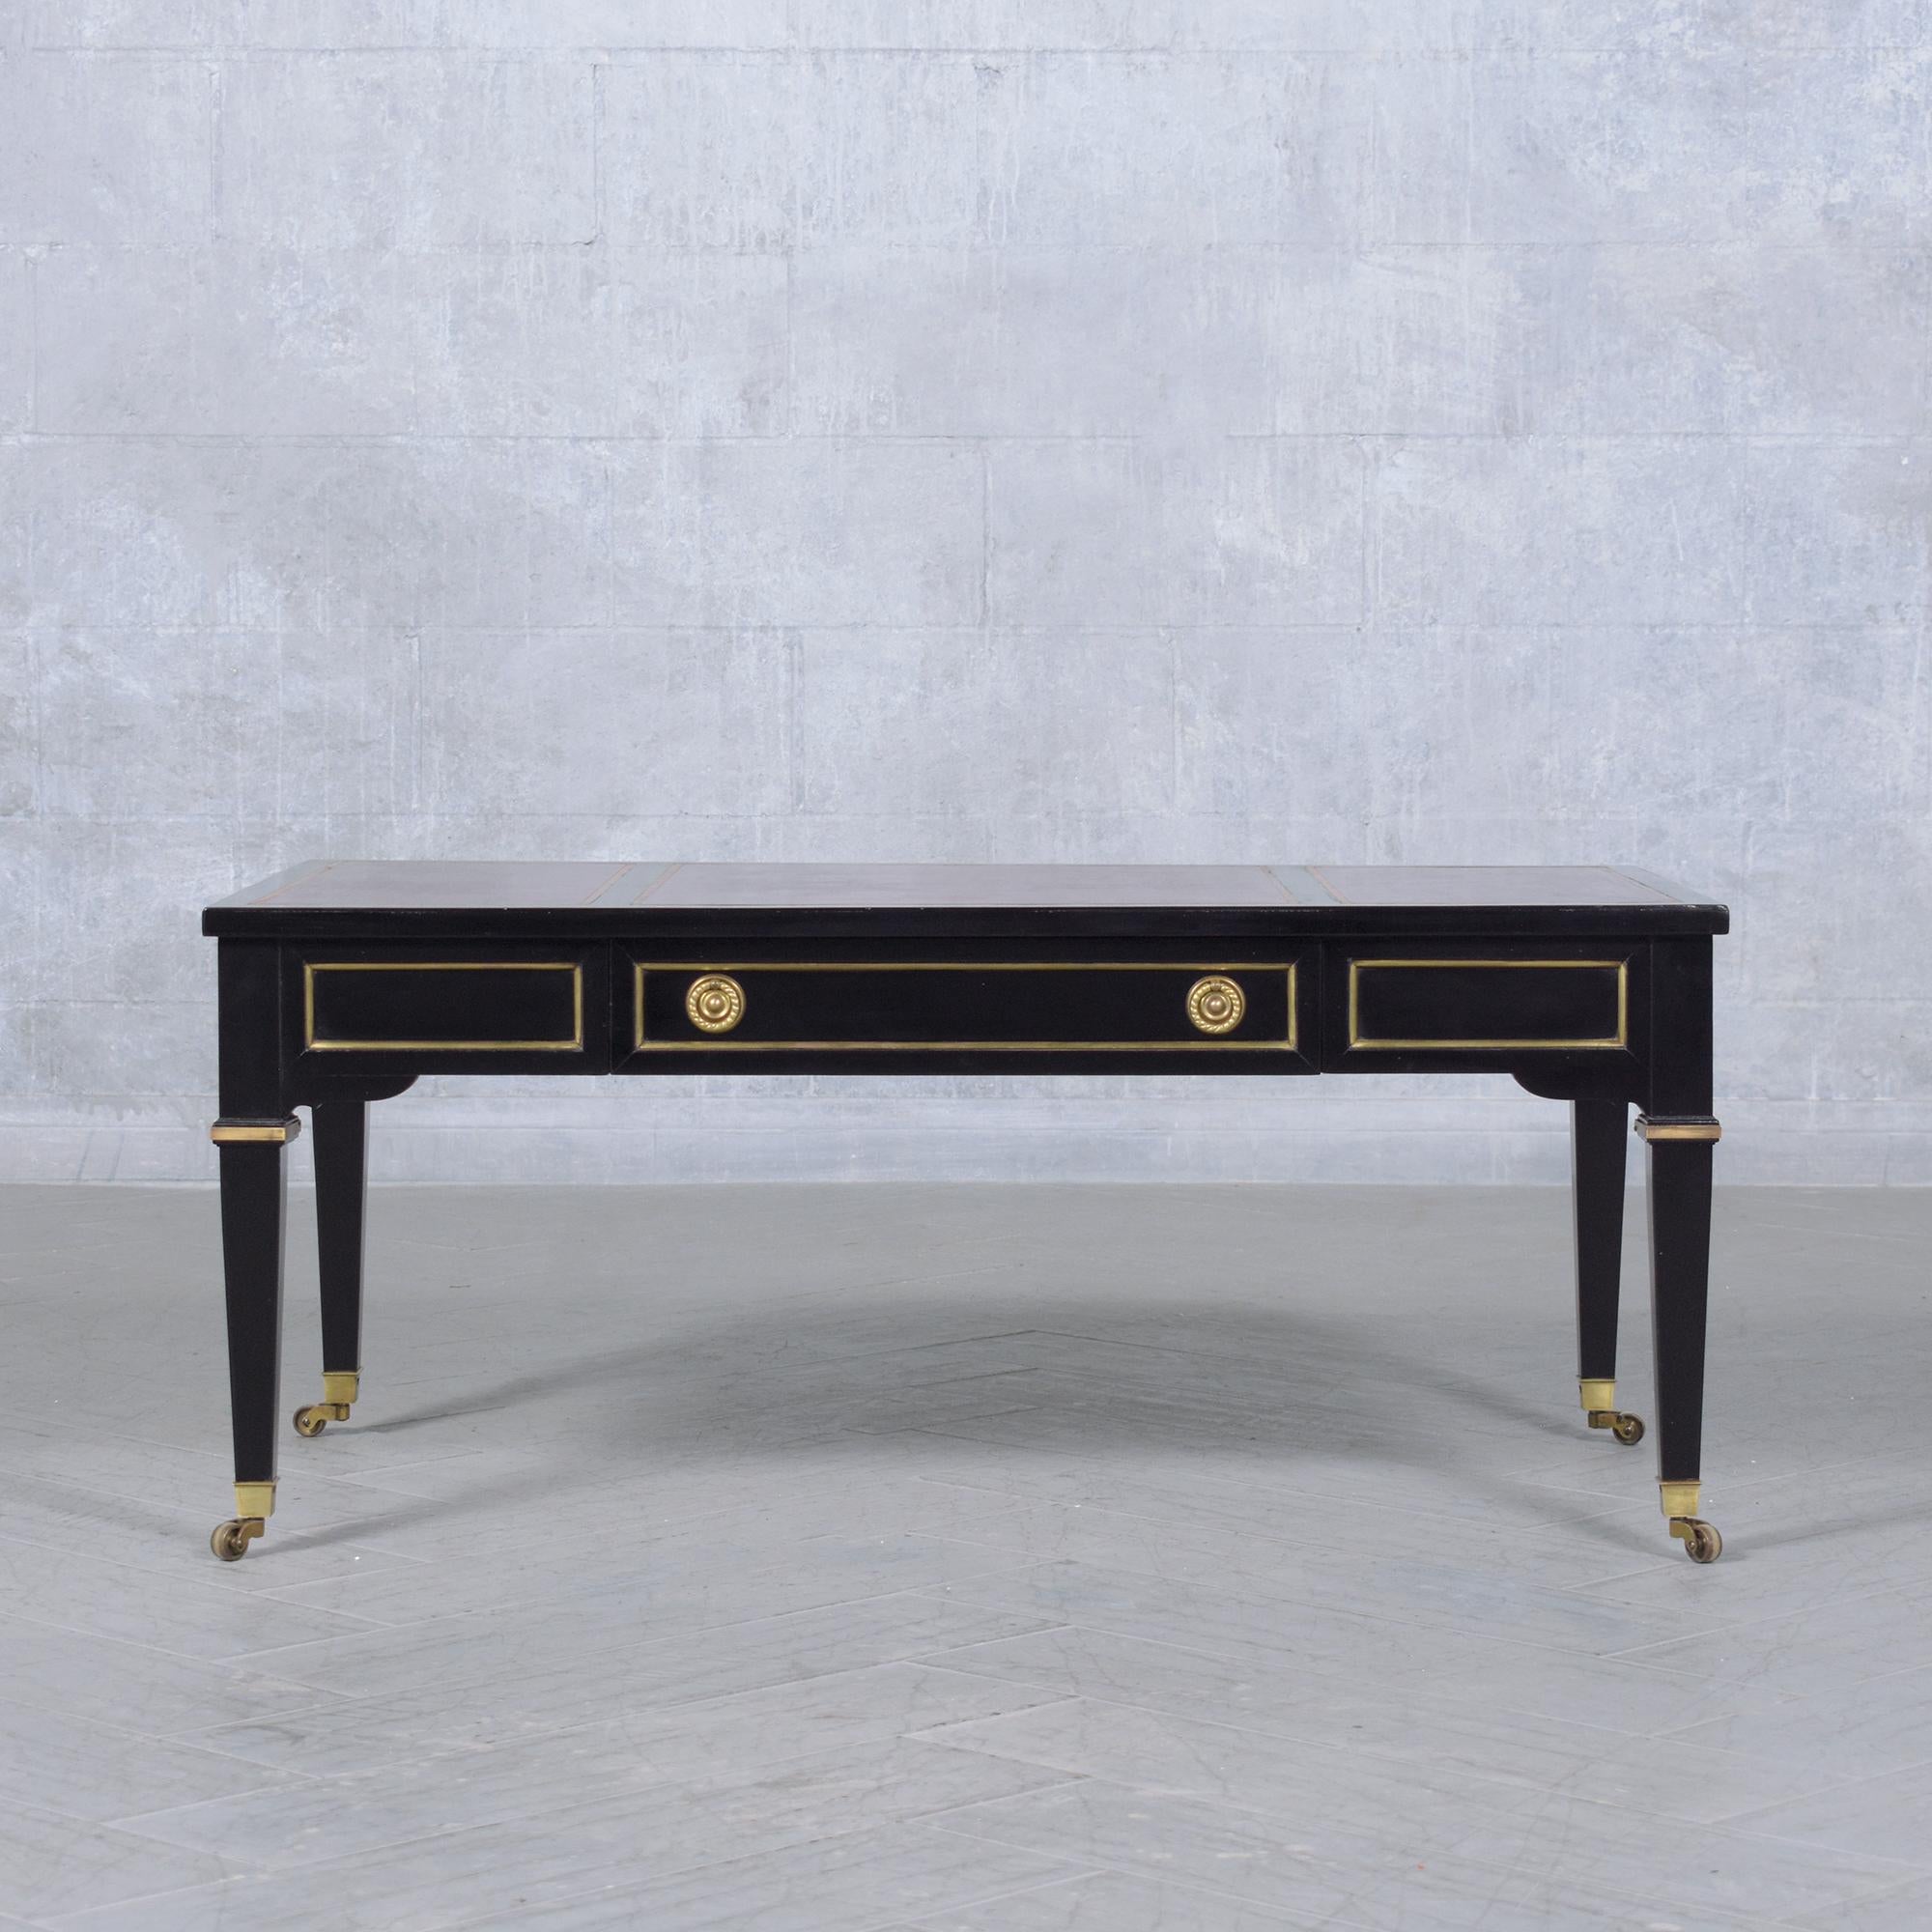 Delve into the opulence of the 1960s with our Hollywood Regency-style Coffee Table by Heritage Henredon, a masterpiece of vintage luxury and craftsmanship. Crafted from ebonized mahogany wood, this table is polished to perfection, reflecting the